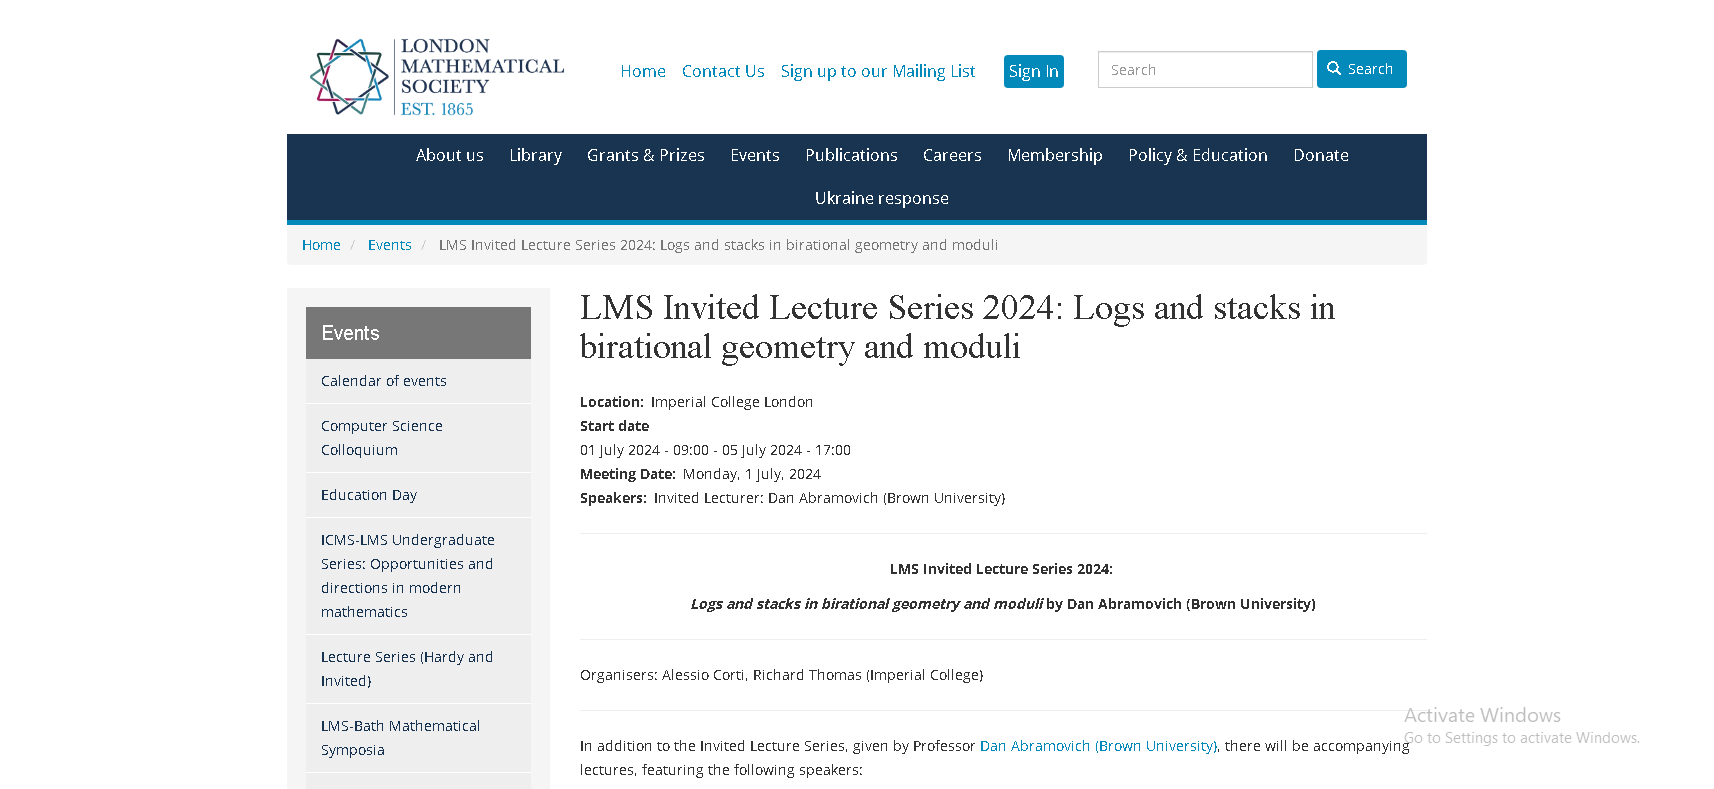 LMS Invited Lectures